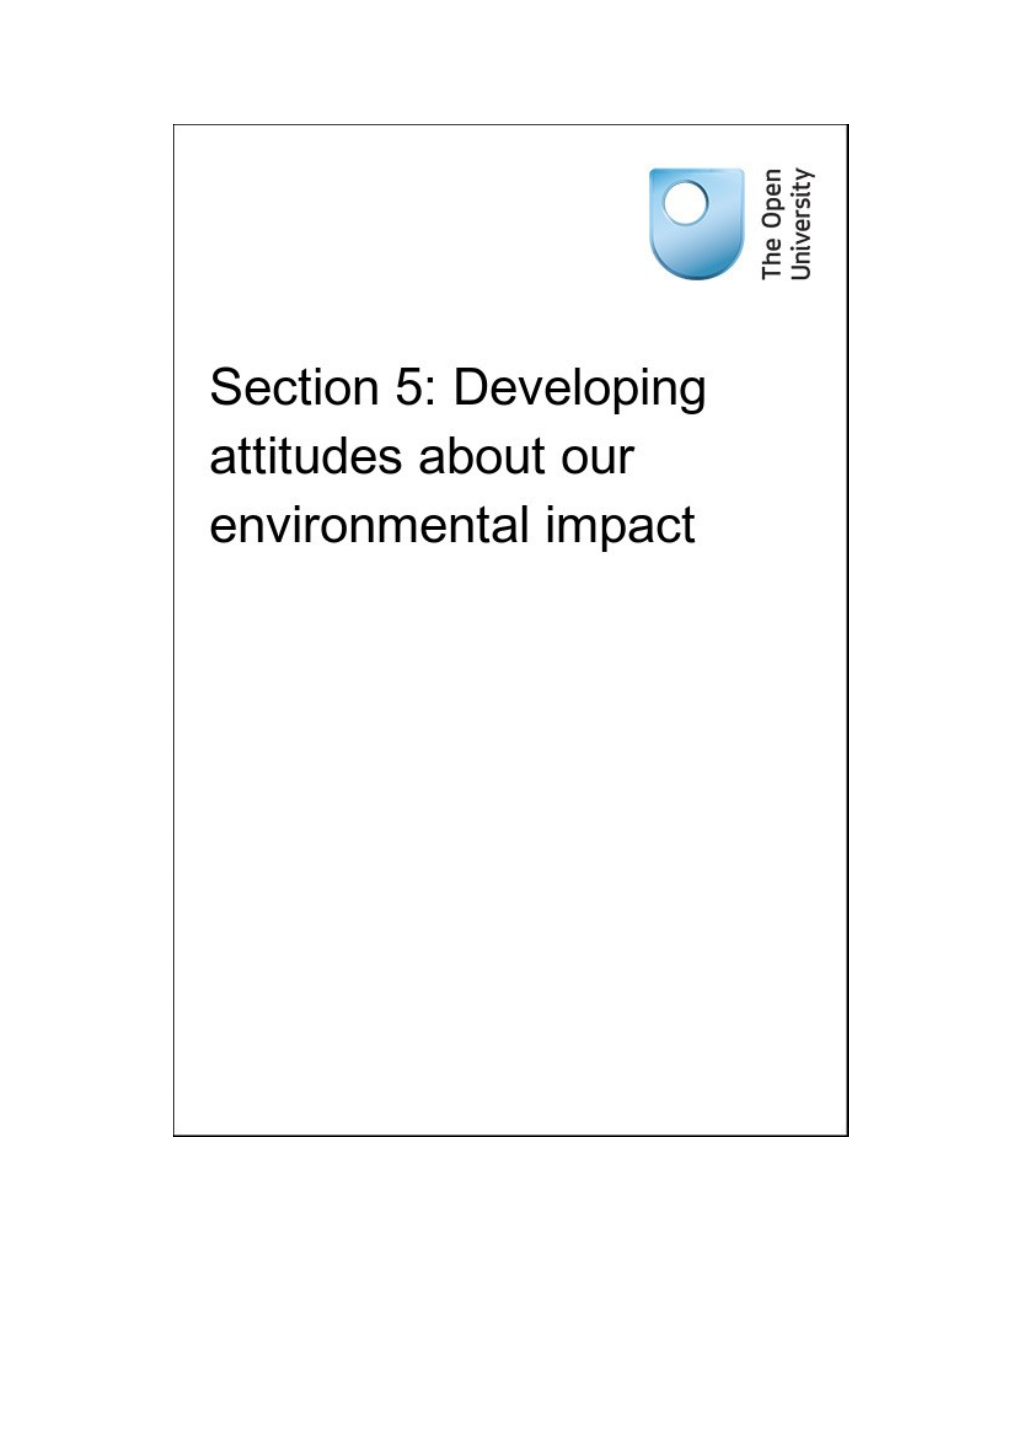 Section 5: Developing Attitudes About Our Environmental Impact